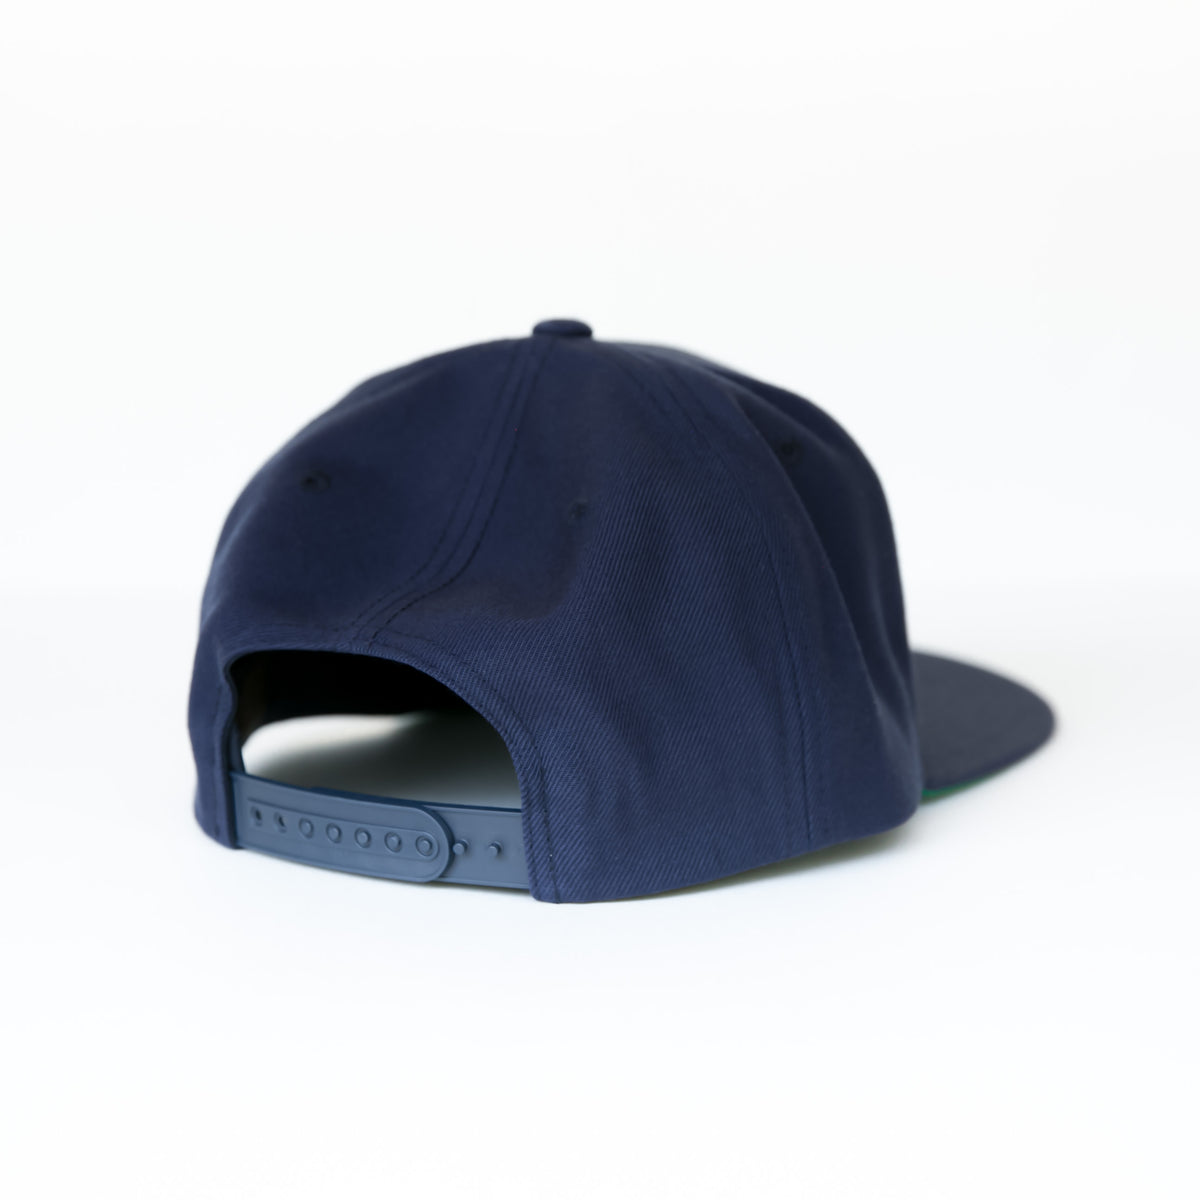 BAD DADS LEATHER PATCH SNAPBACK - NAVY